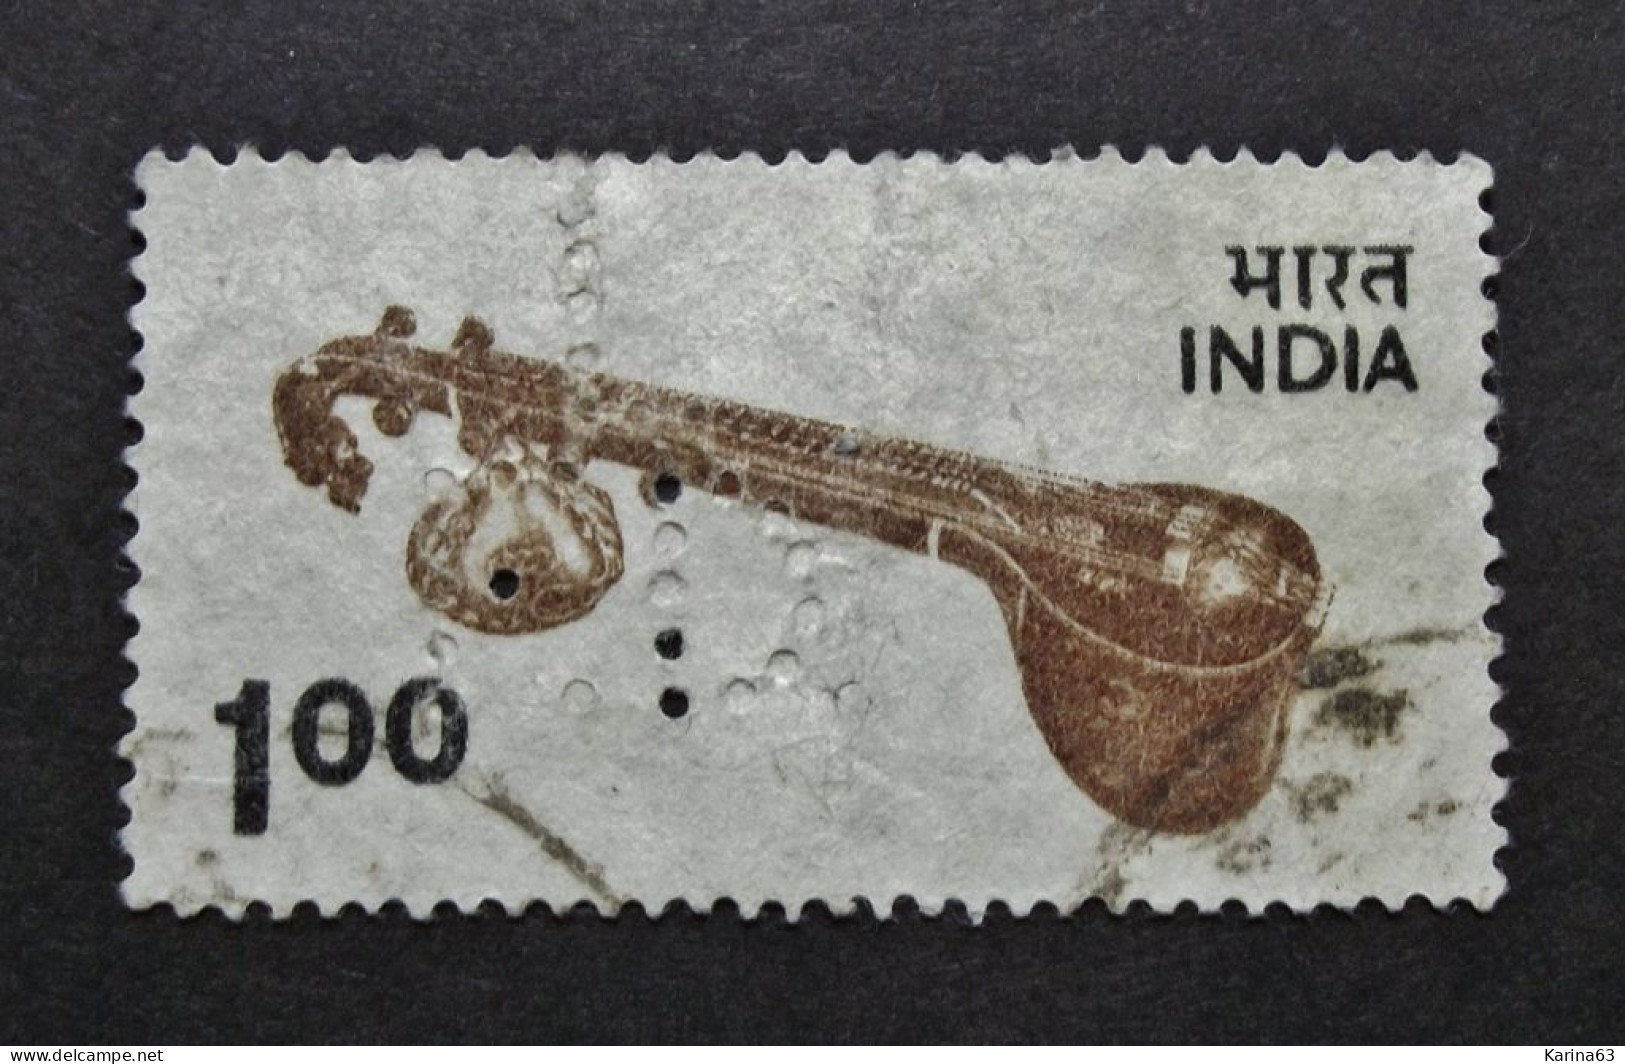 India - Perfin - Lochung  - L / FD (no Ident)  - Cancelled - Usados